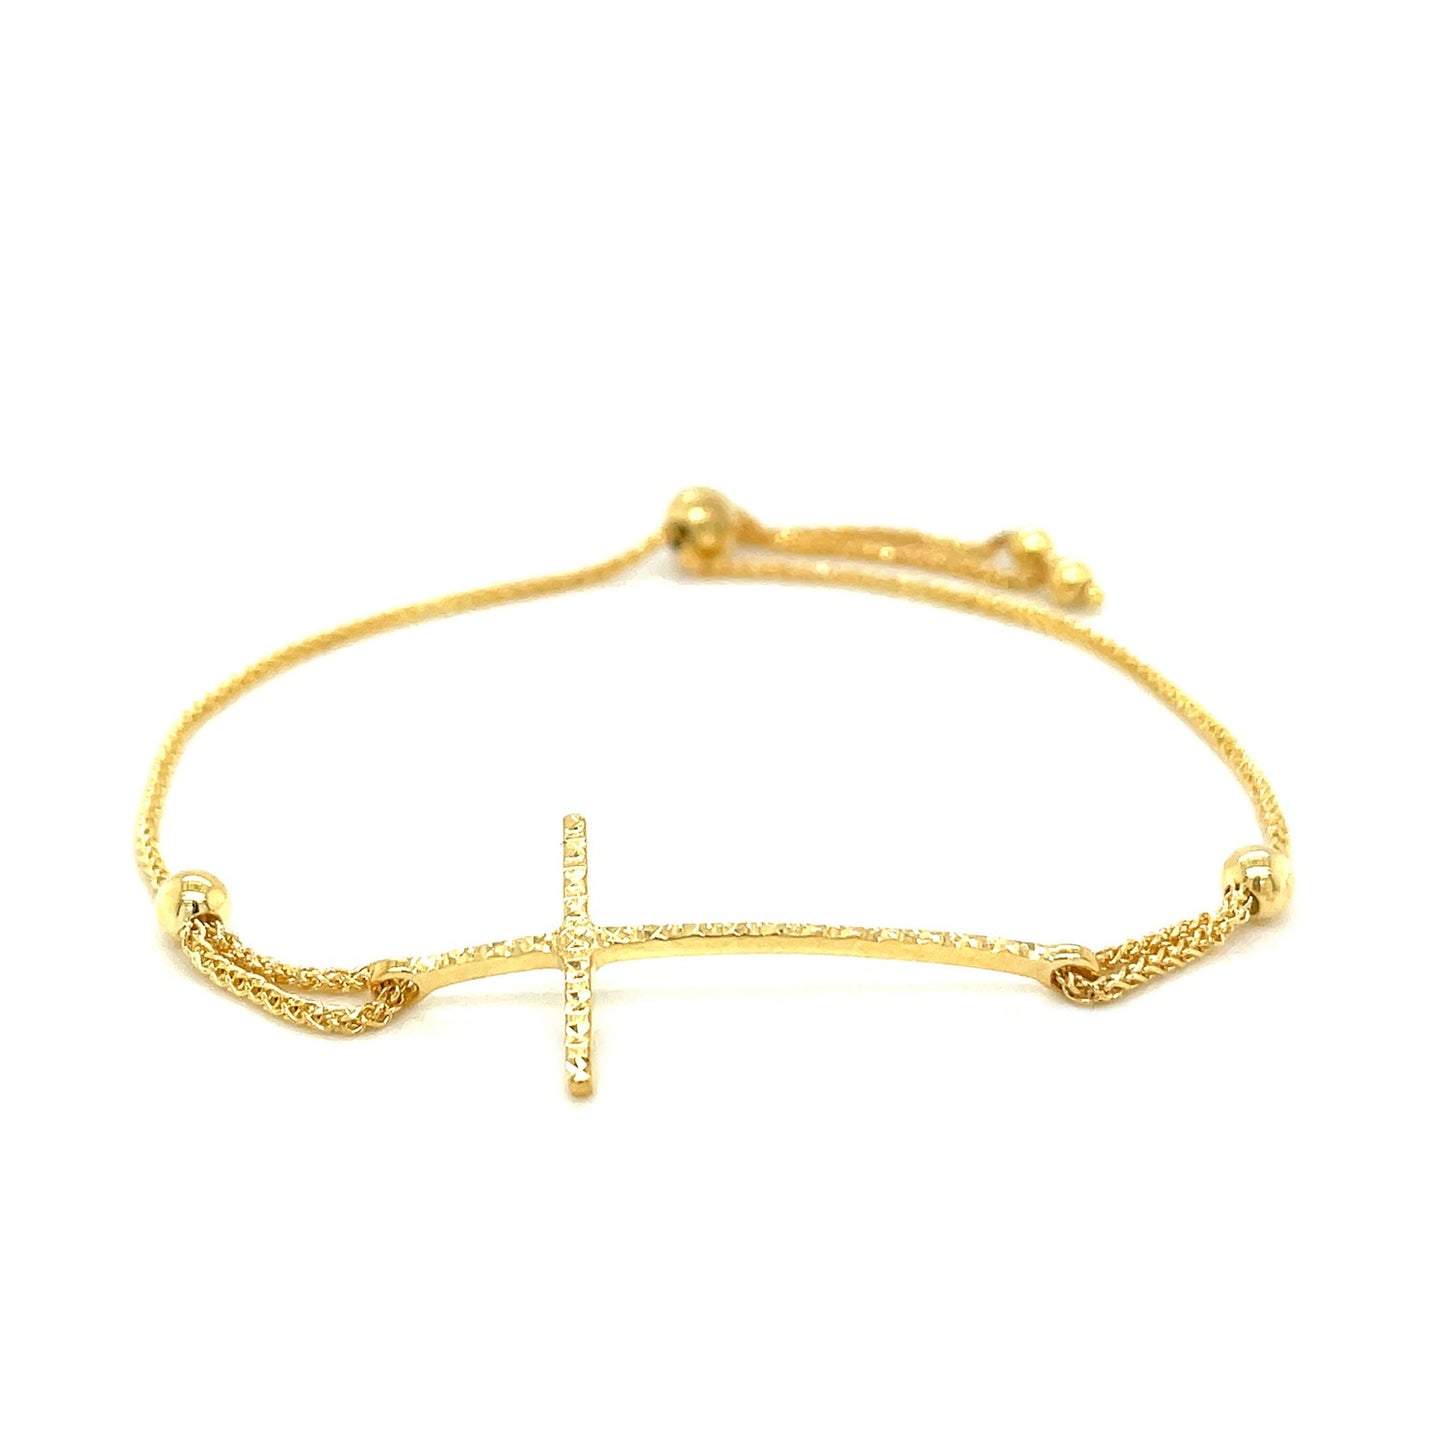 Adjustable Bracelet with Textured Cross in 14k Yellow Gold